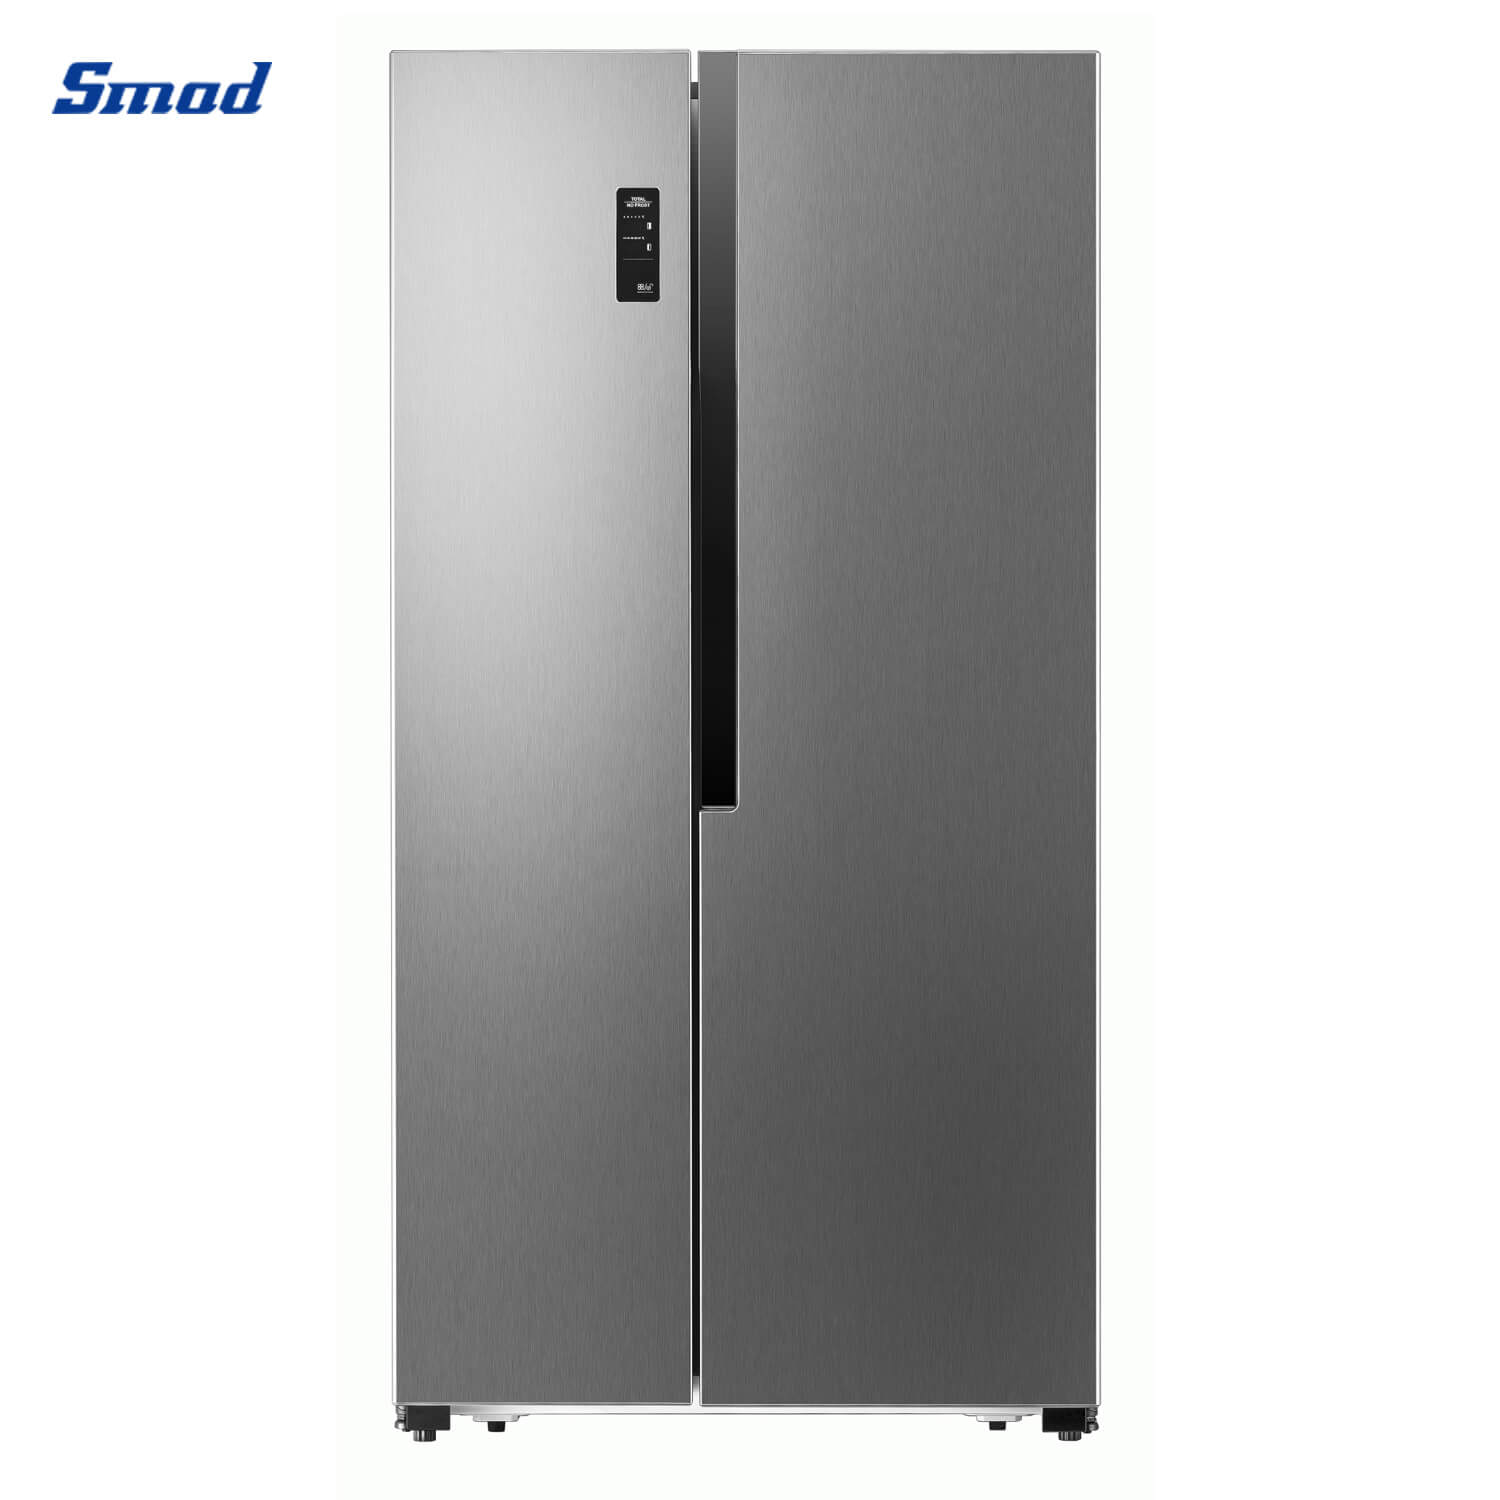 Smad 18.4 Cu. Ft. No Frost Side by Side Refrigerator with Authentic ice maker